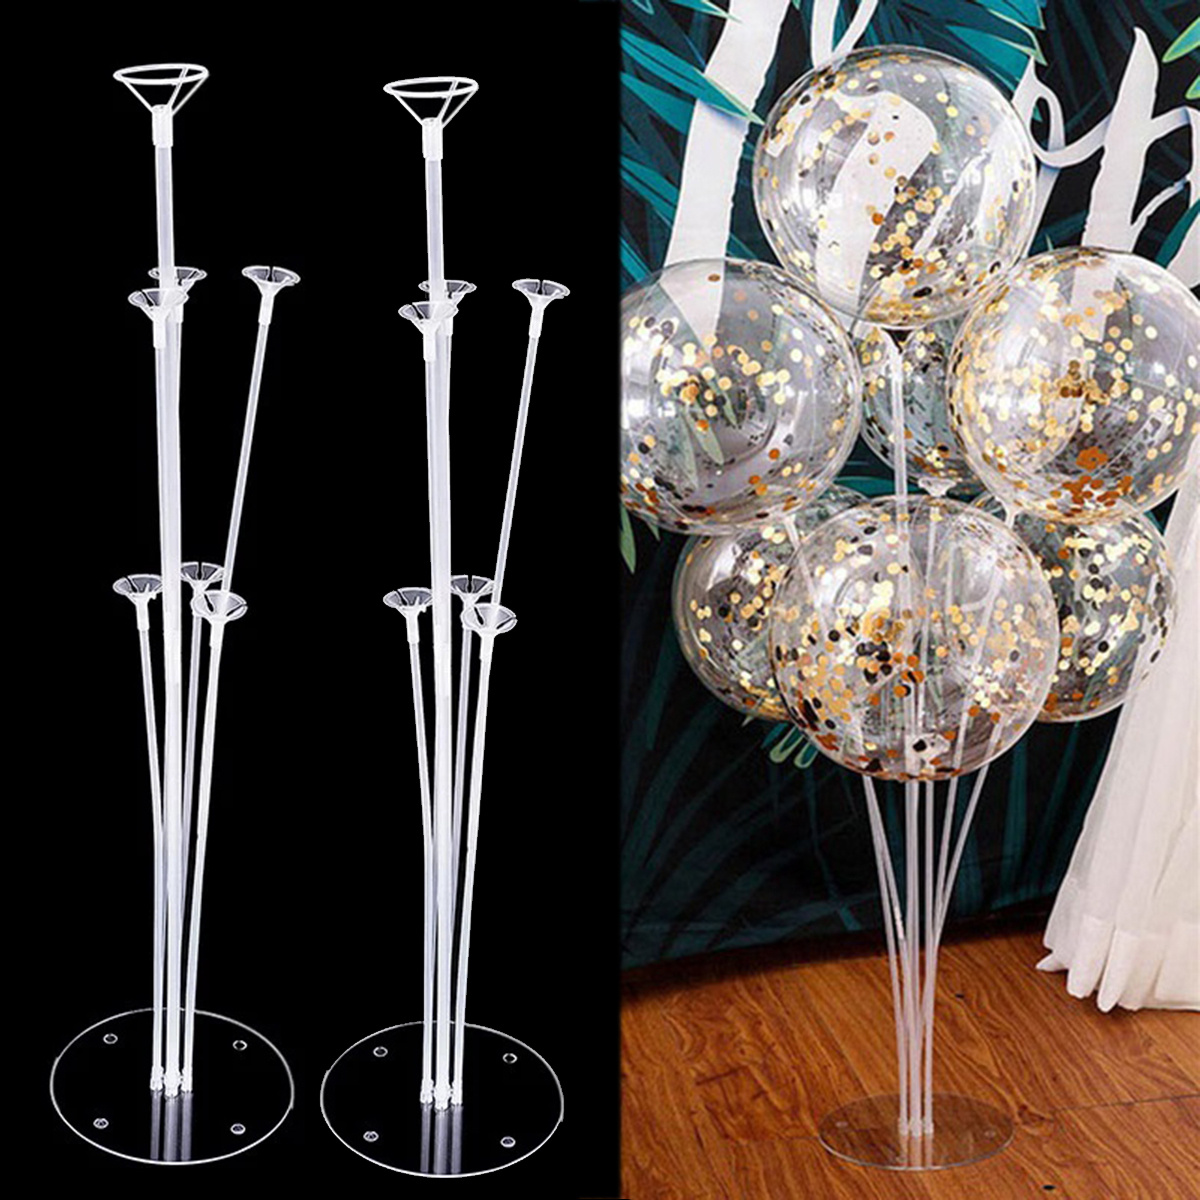 1/2/4Sets 7 Tubes Table Balloon Stand Kit Support Holder Balloons Stand  Party Wedding - AliExpress